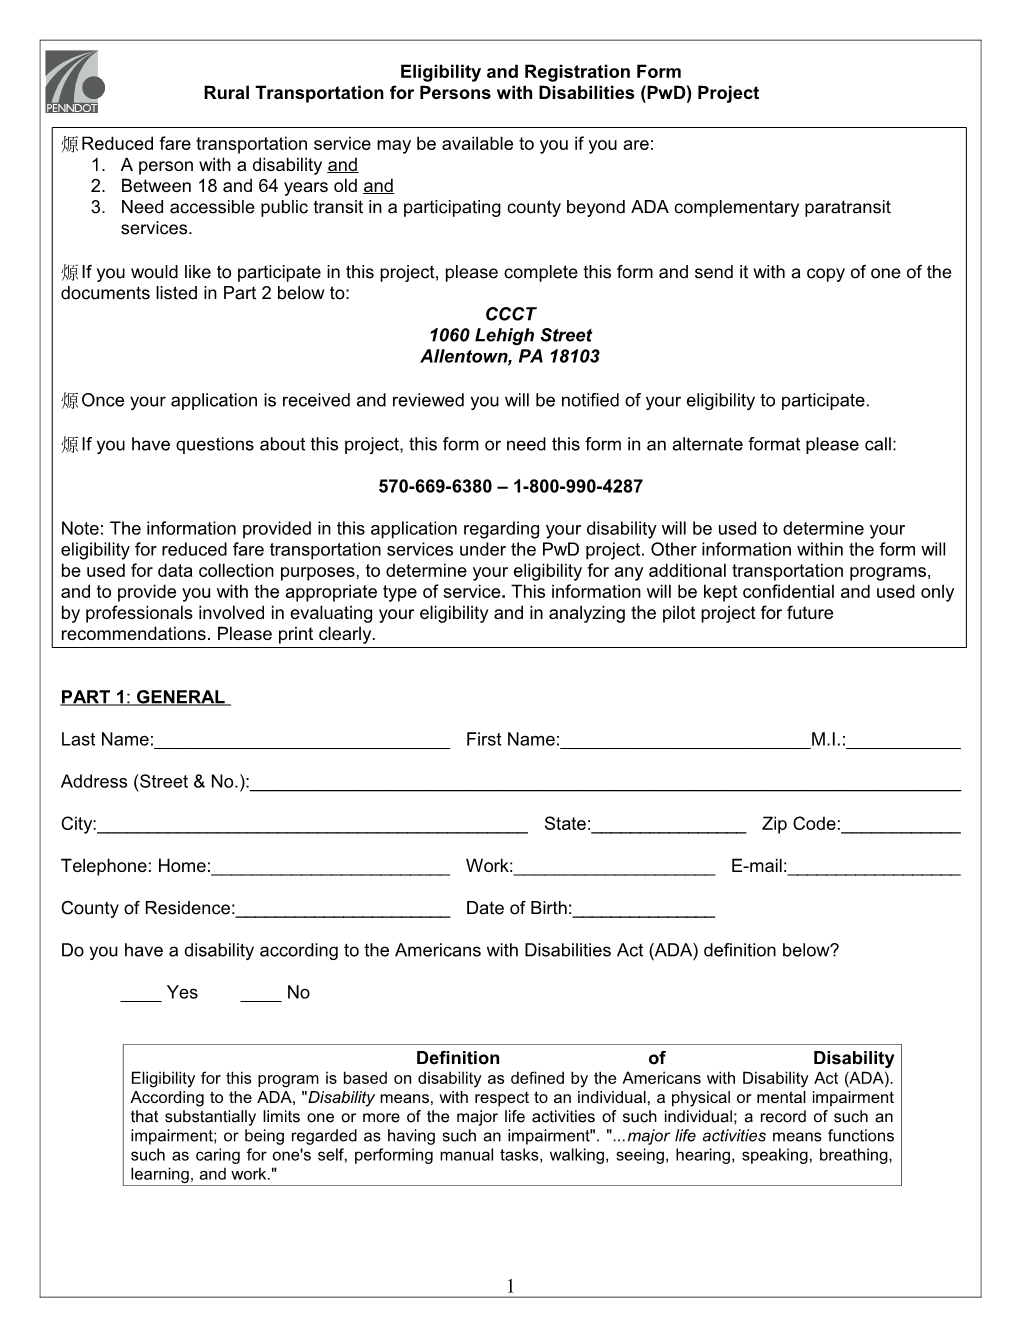 Eligibility and Registration Form